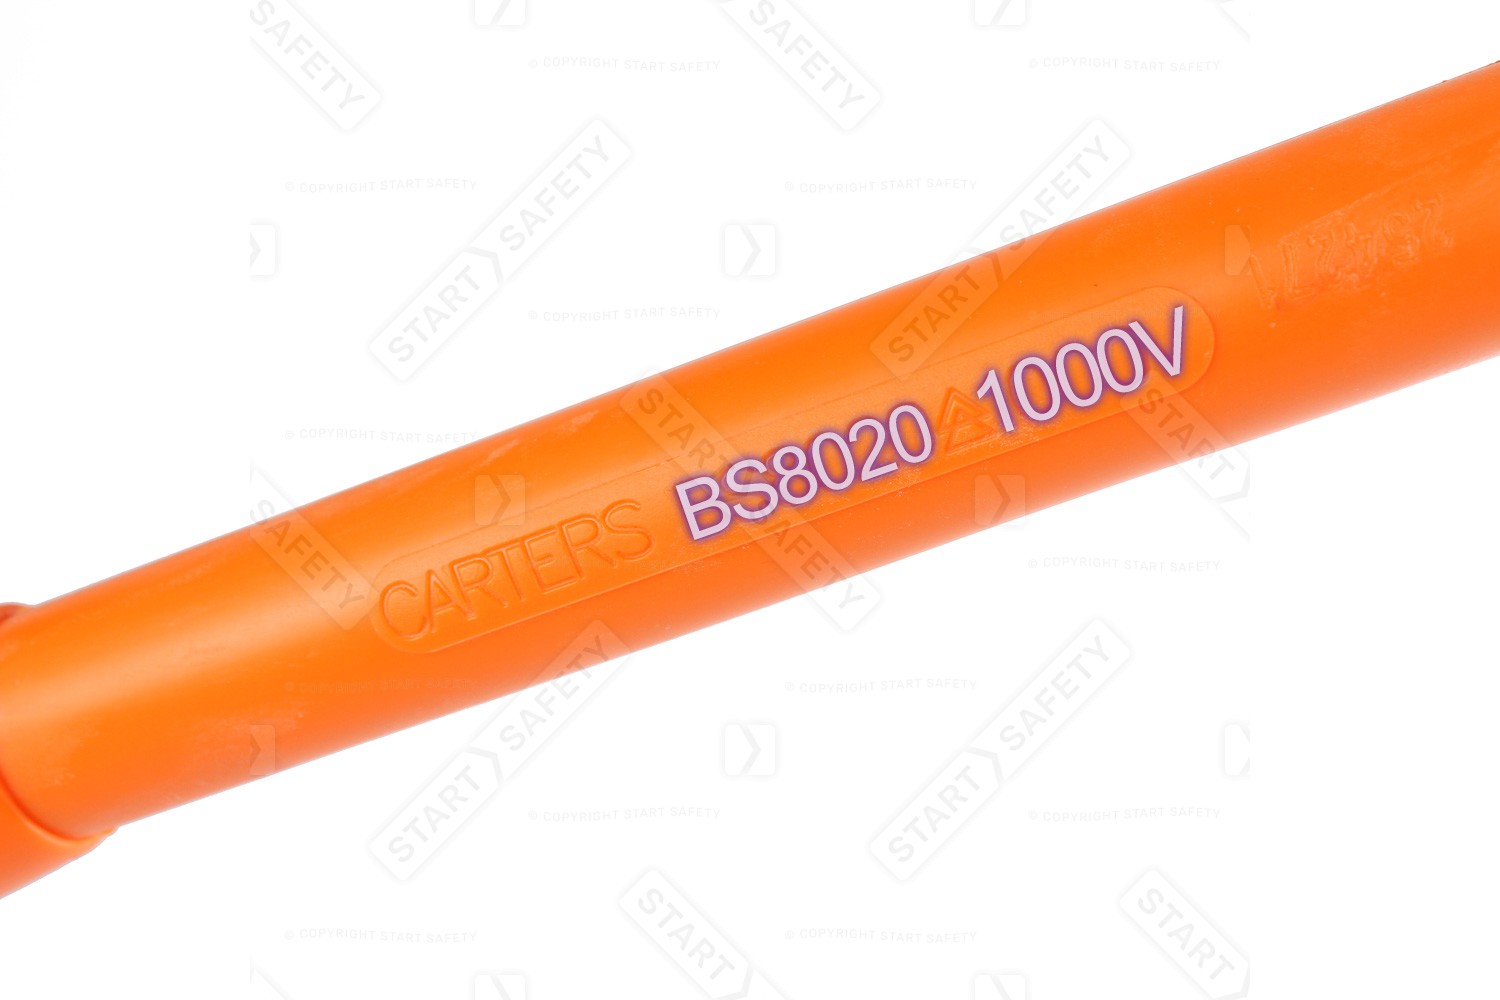 BS8020 compliant hand tools